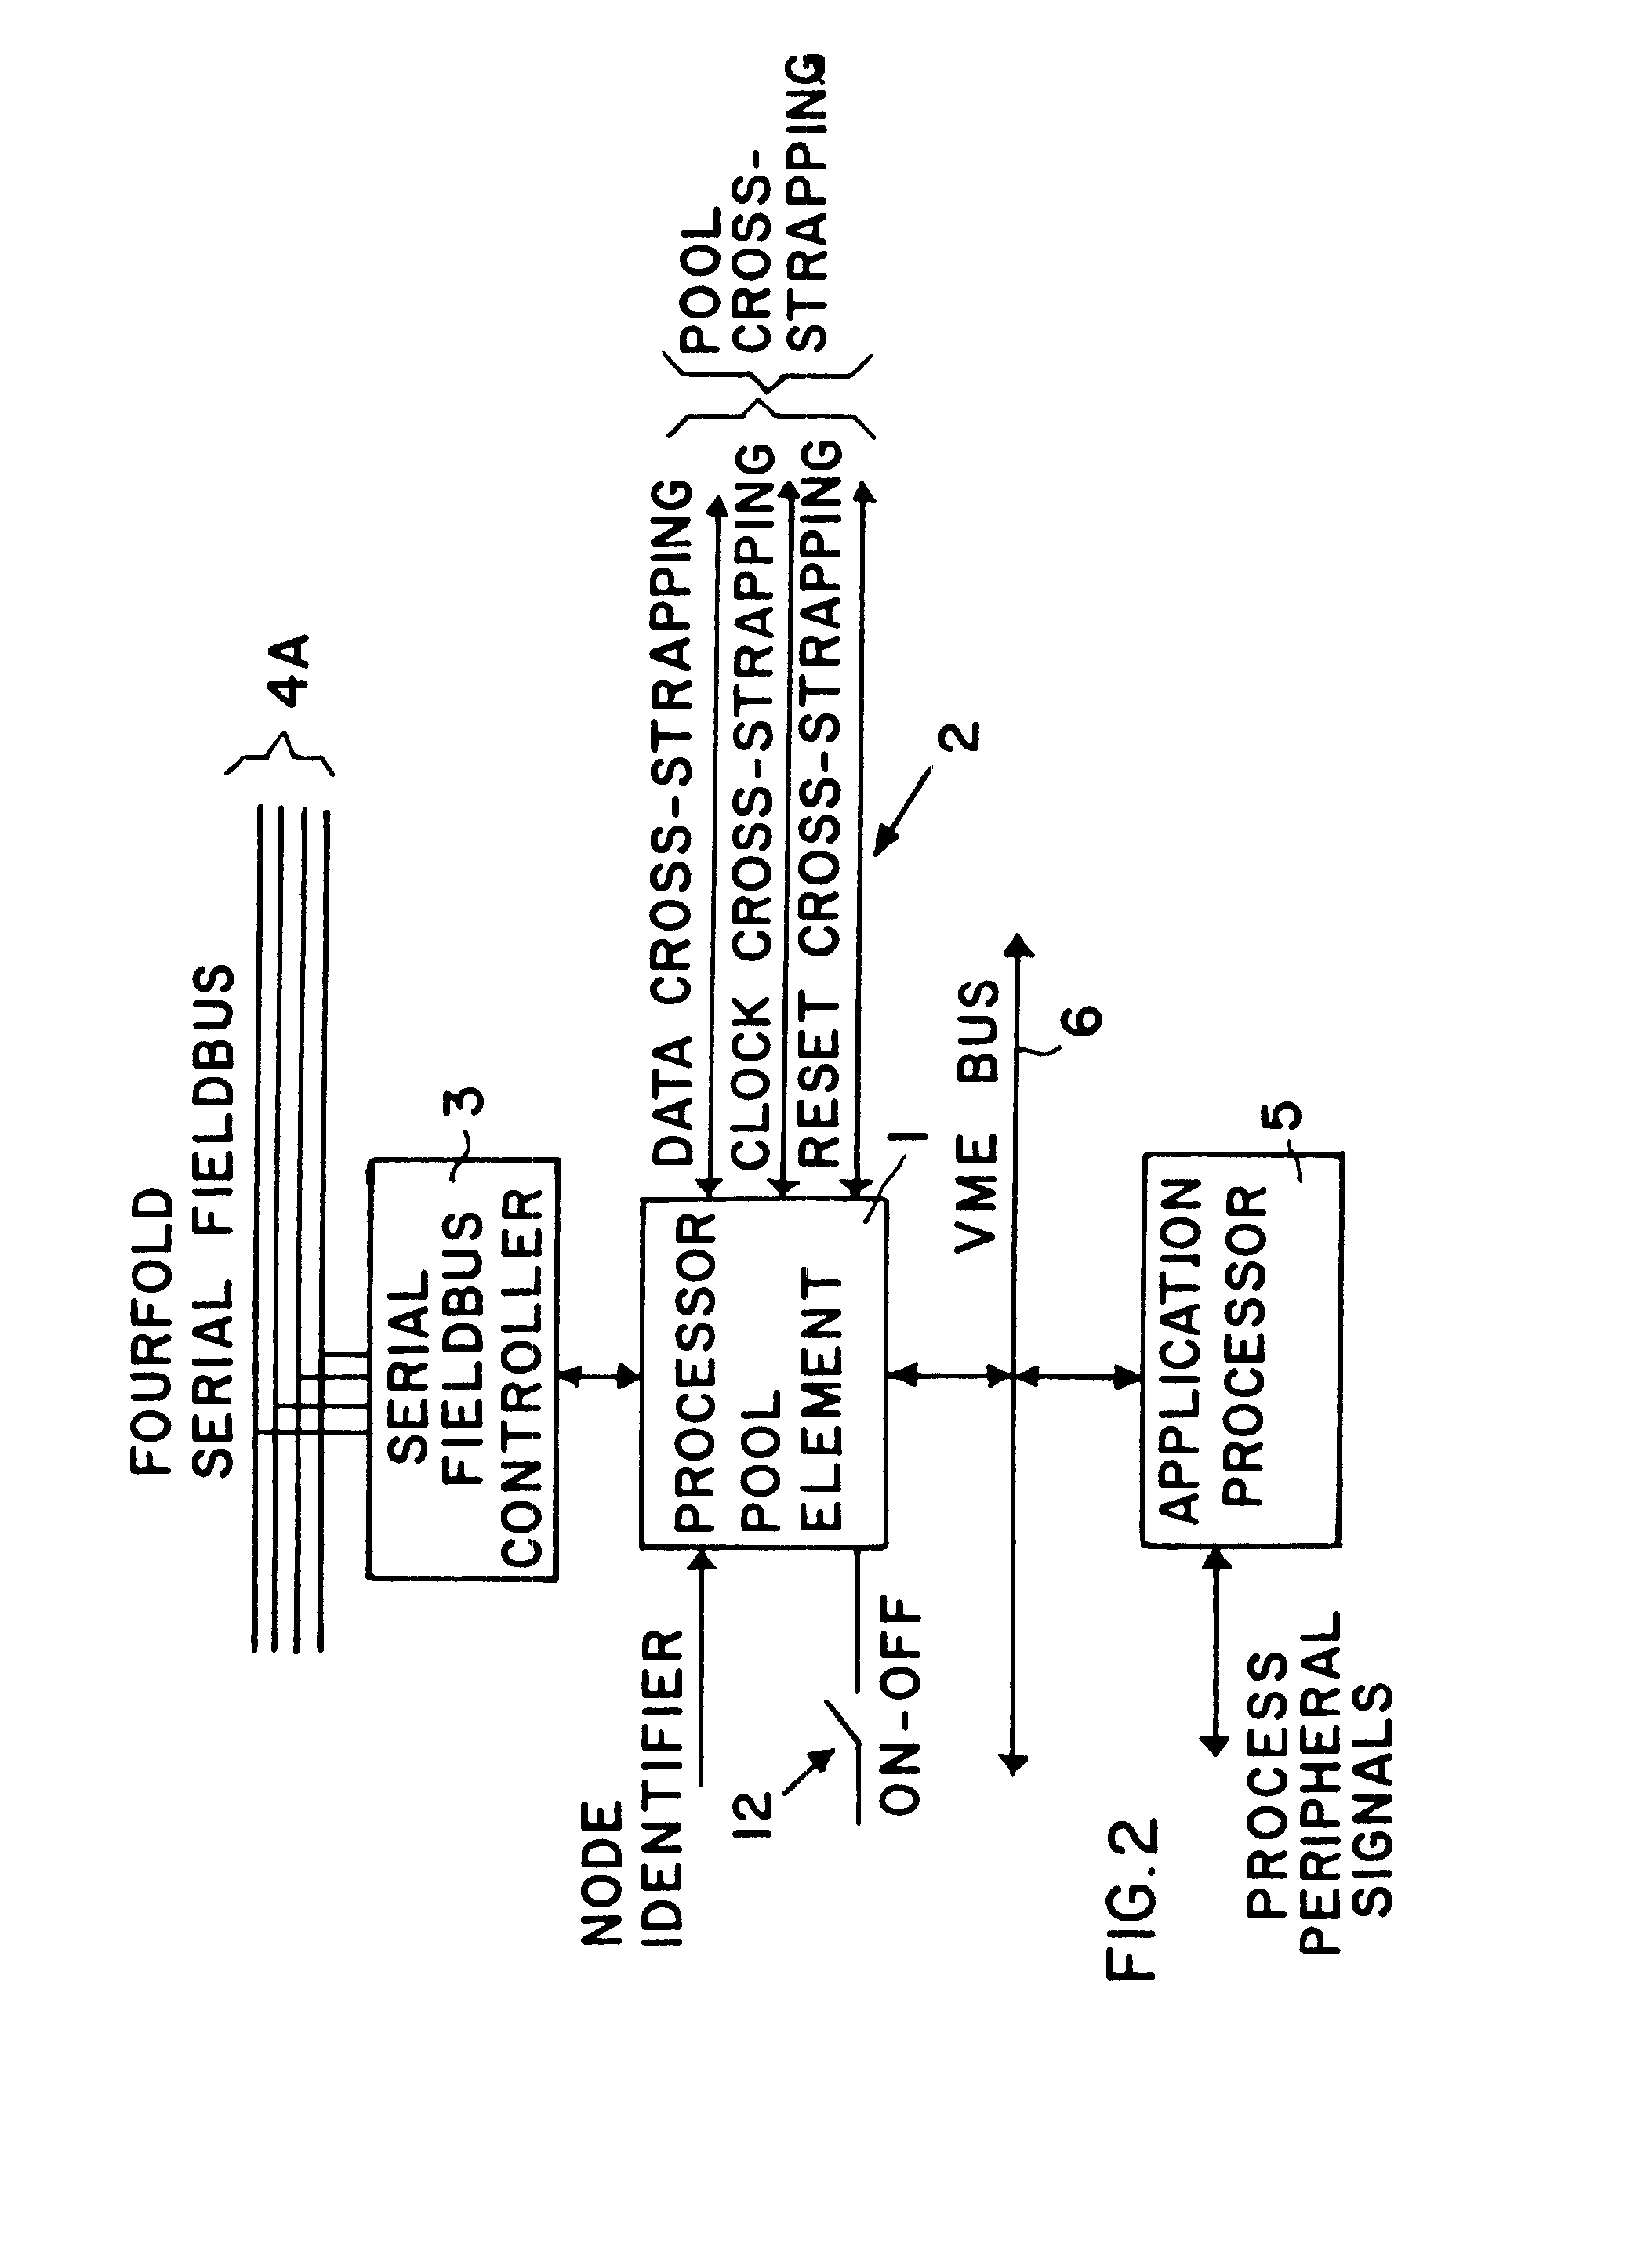 Method and apparatus for fault tolerant execution of computer programs